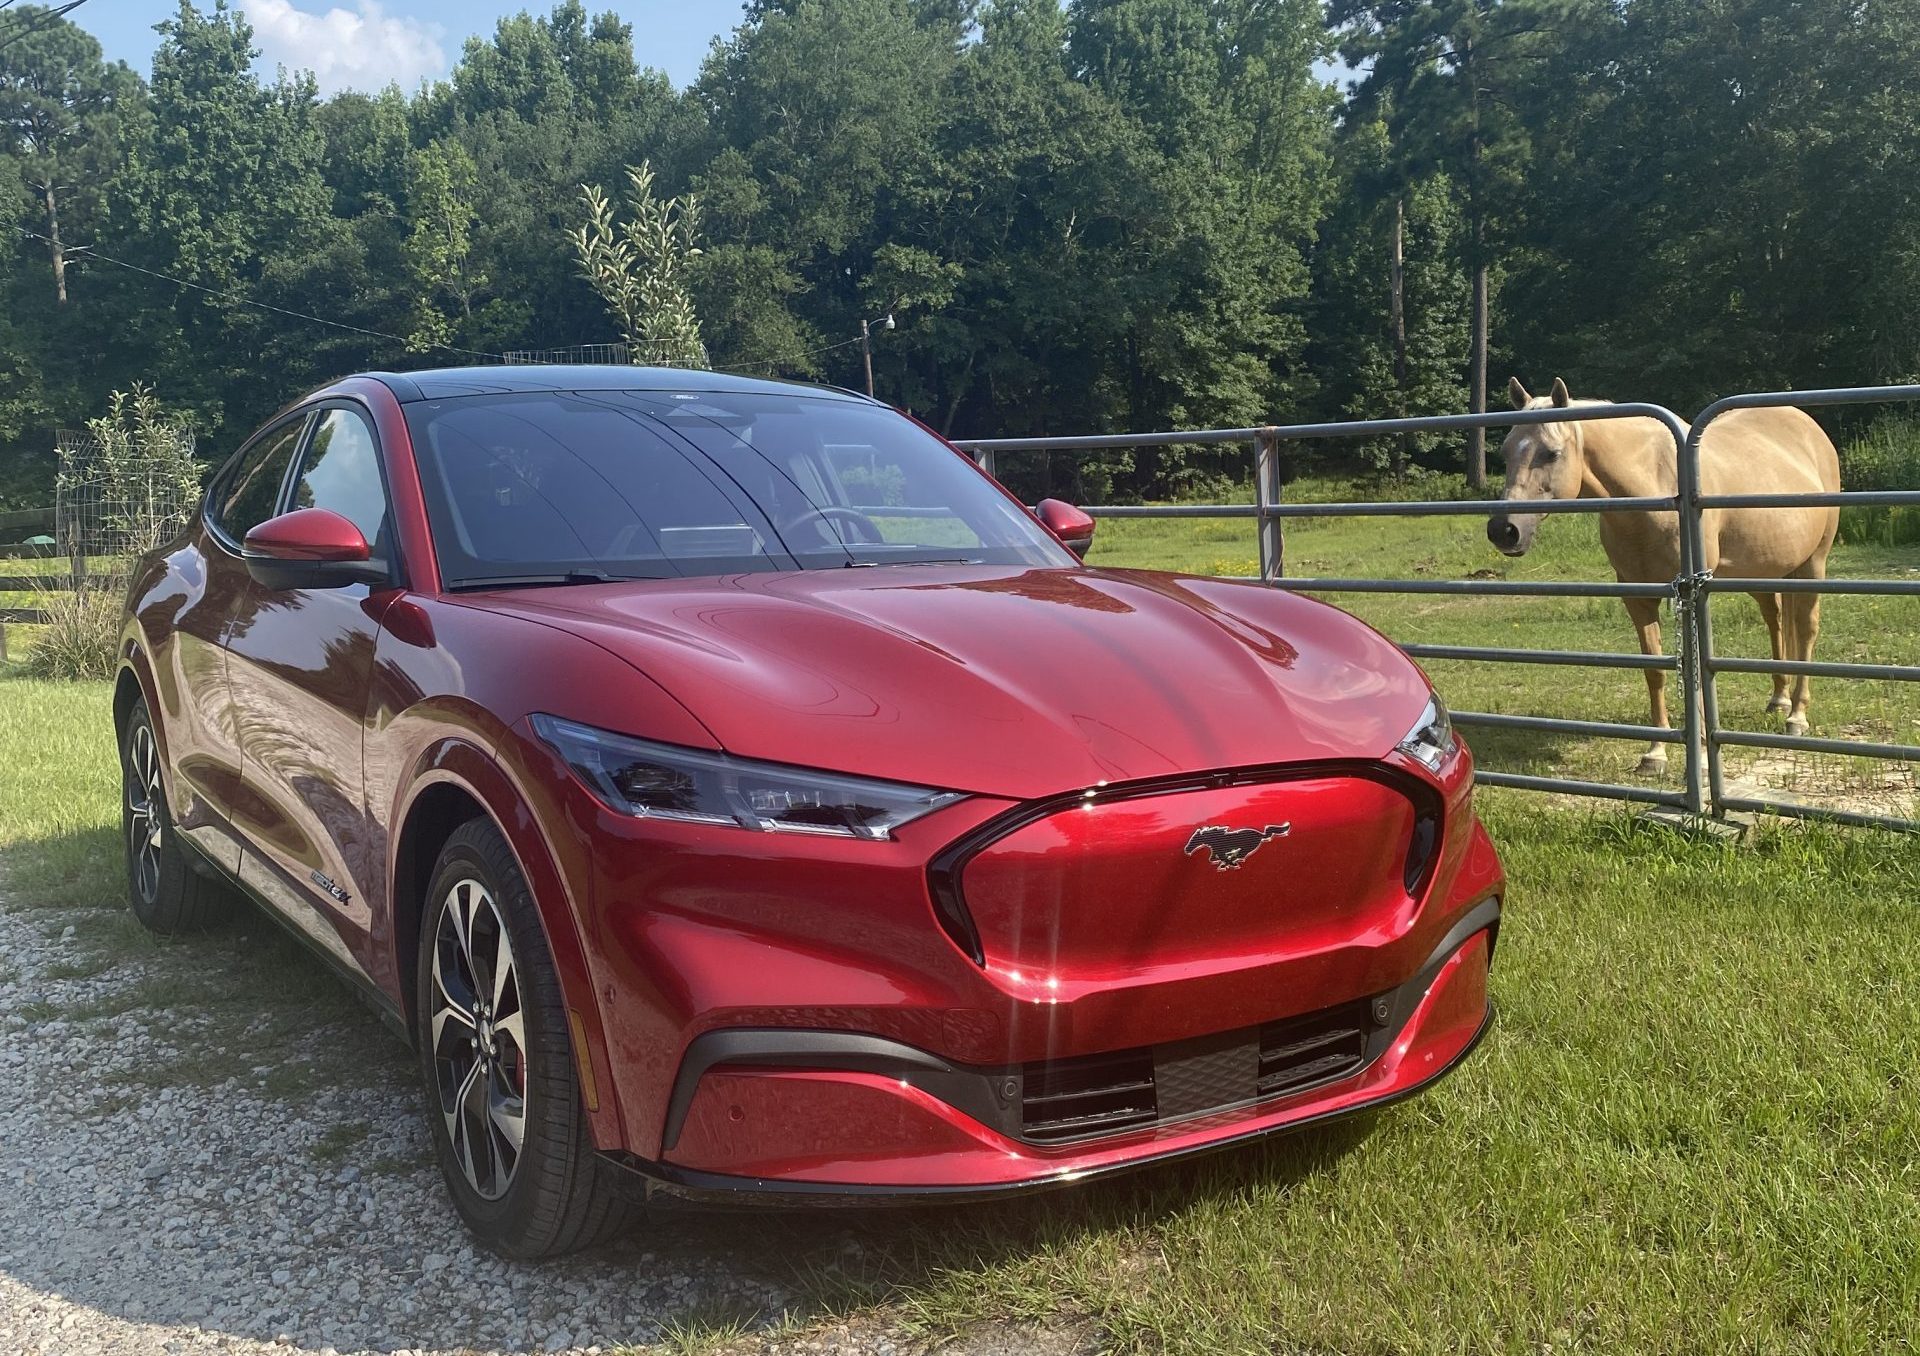 A 2021 Ford Mustang Mach-E electric vehicle to review by a horse